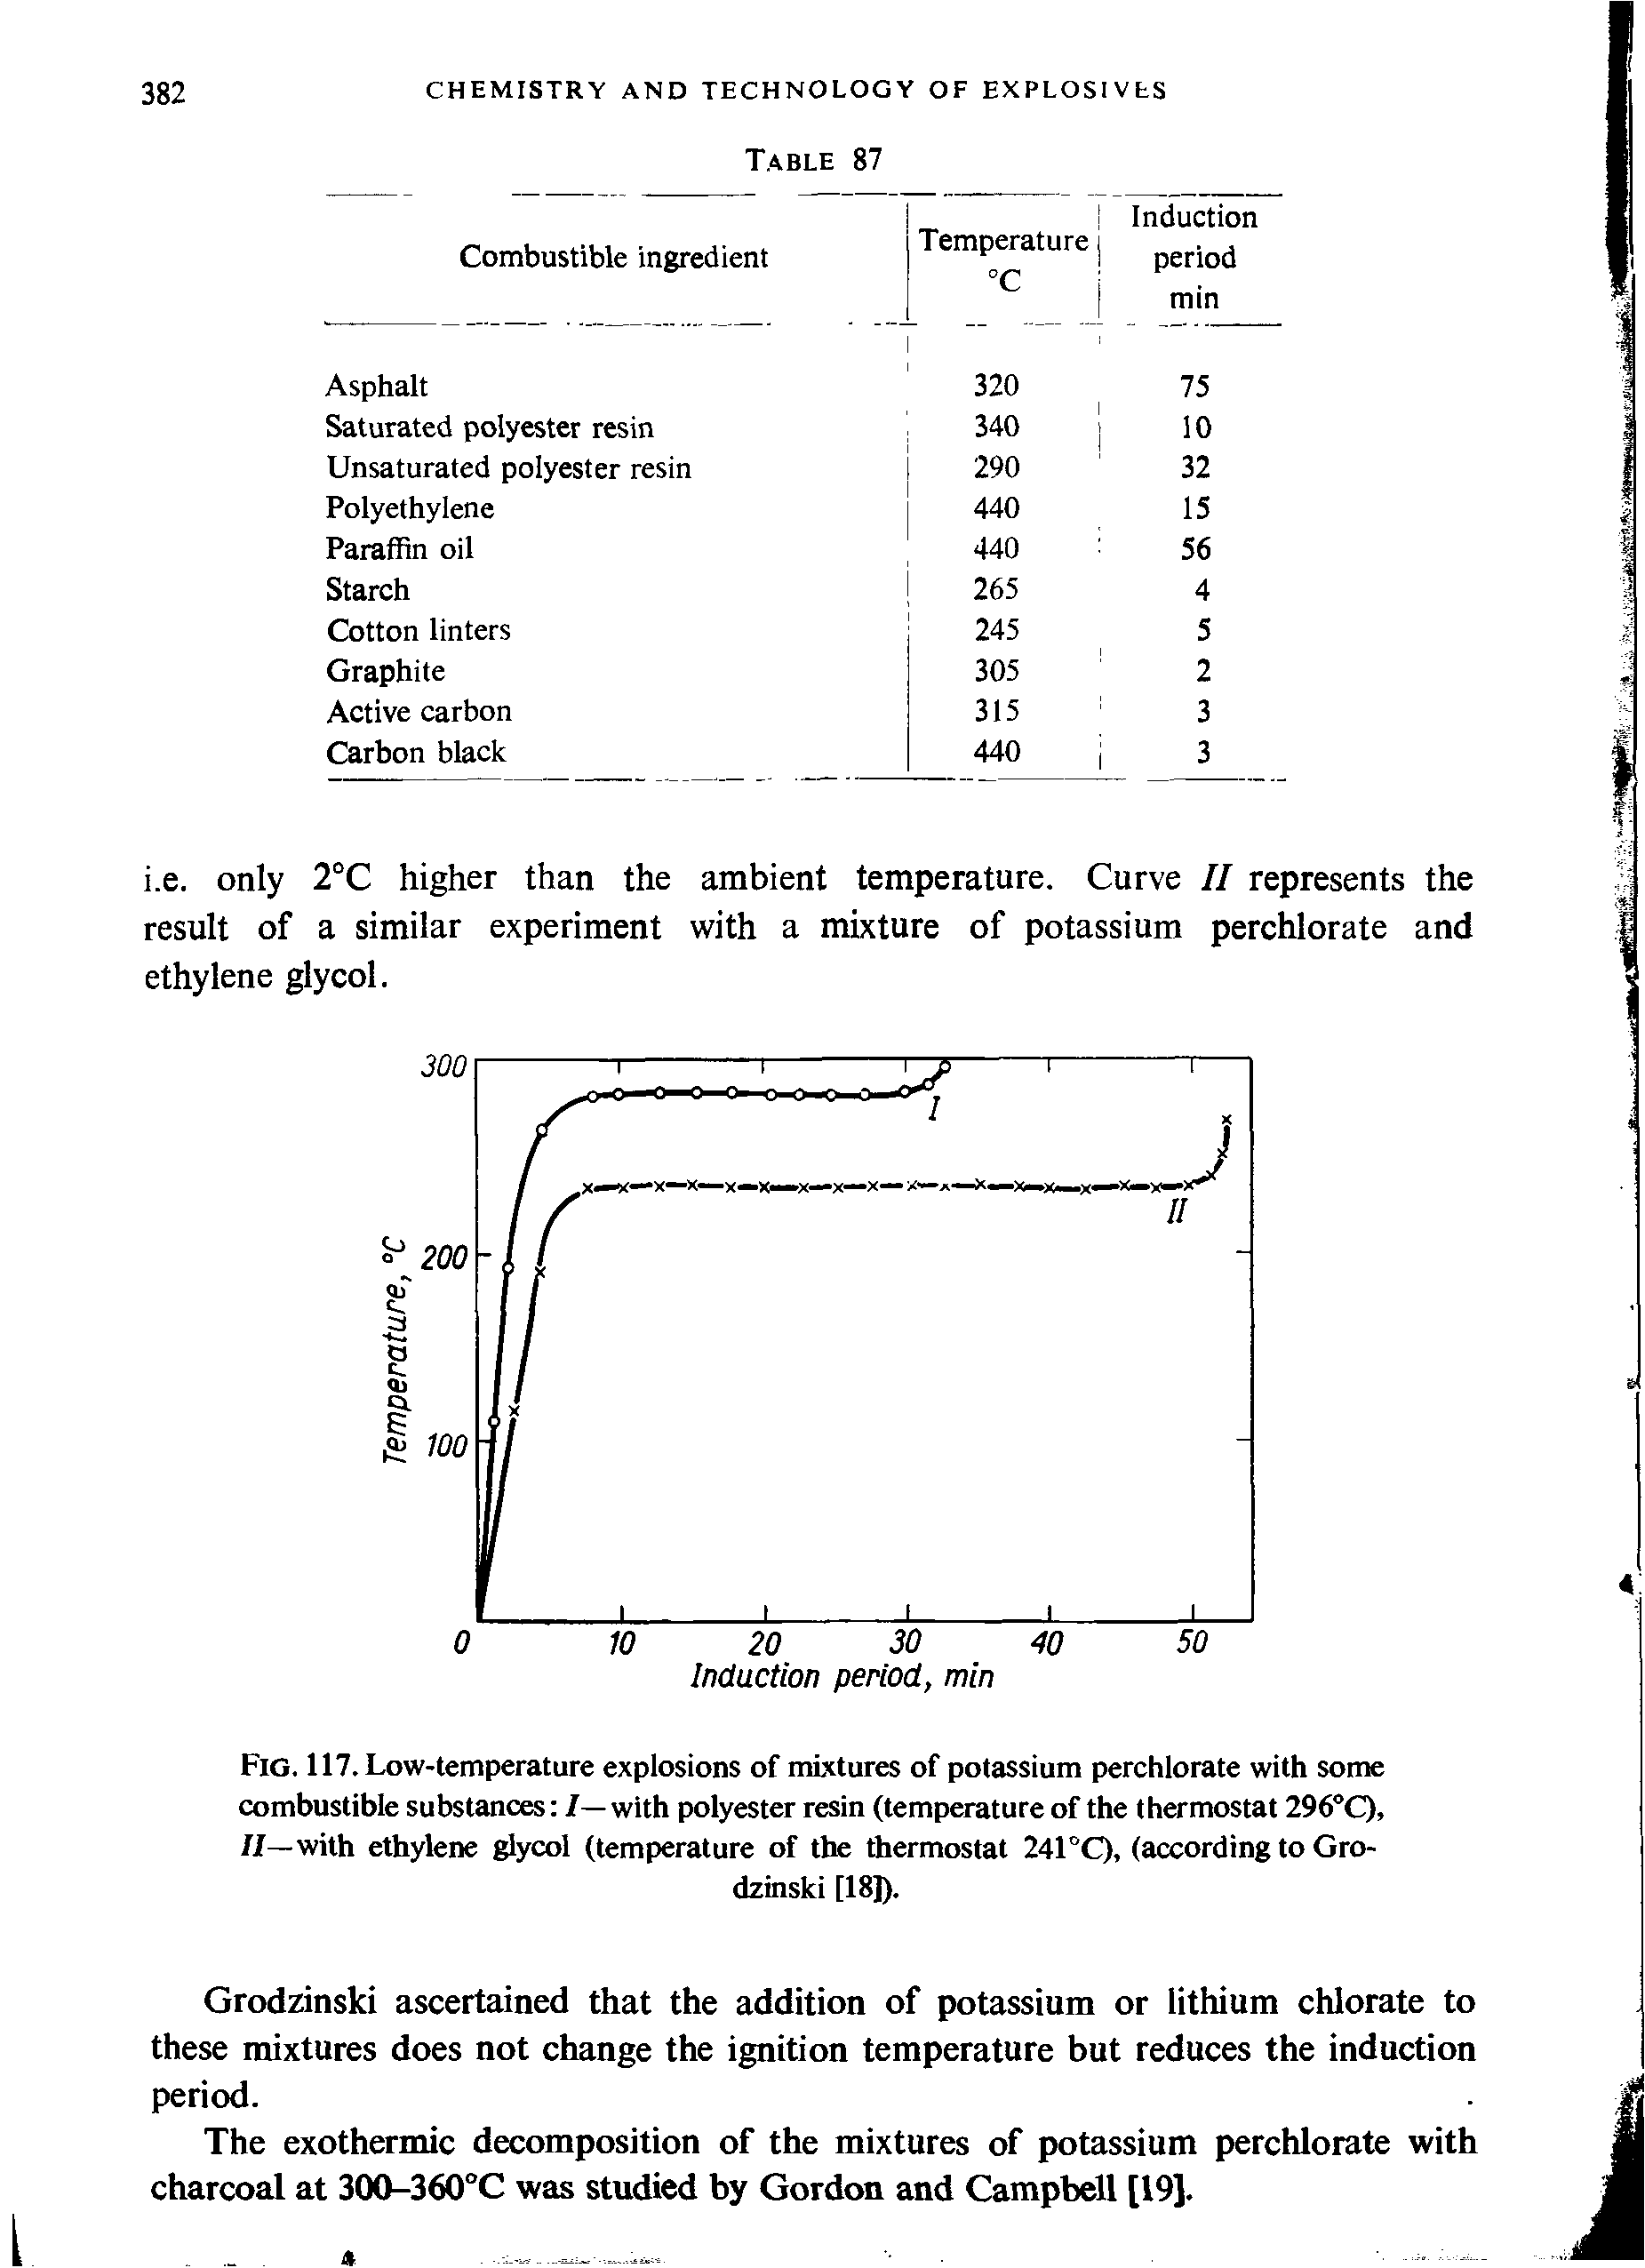 Fig. 117. Low-temperature explosions of mixtures of potassium perchlorate with some combustible substances /—with polyester resin (temperature of the thermostat 296°C), //—with ethylene glycol (temperature of the thermostat 241°C), (according to Gro-...